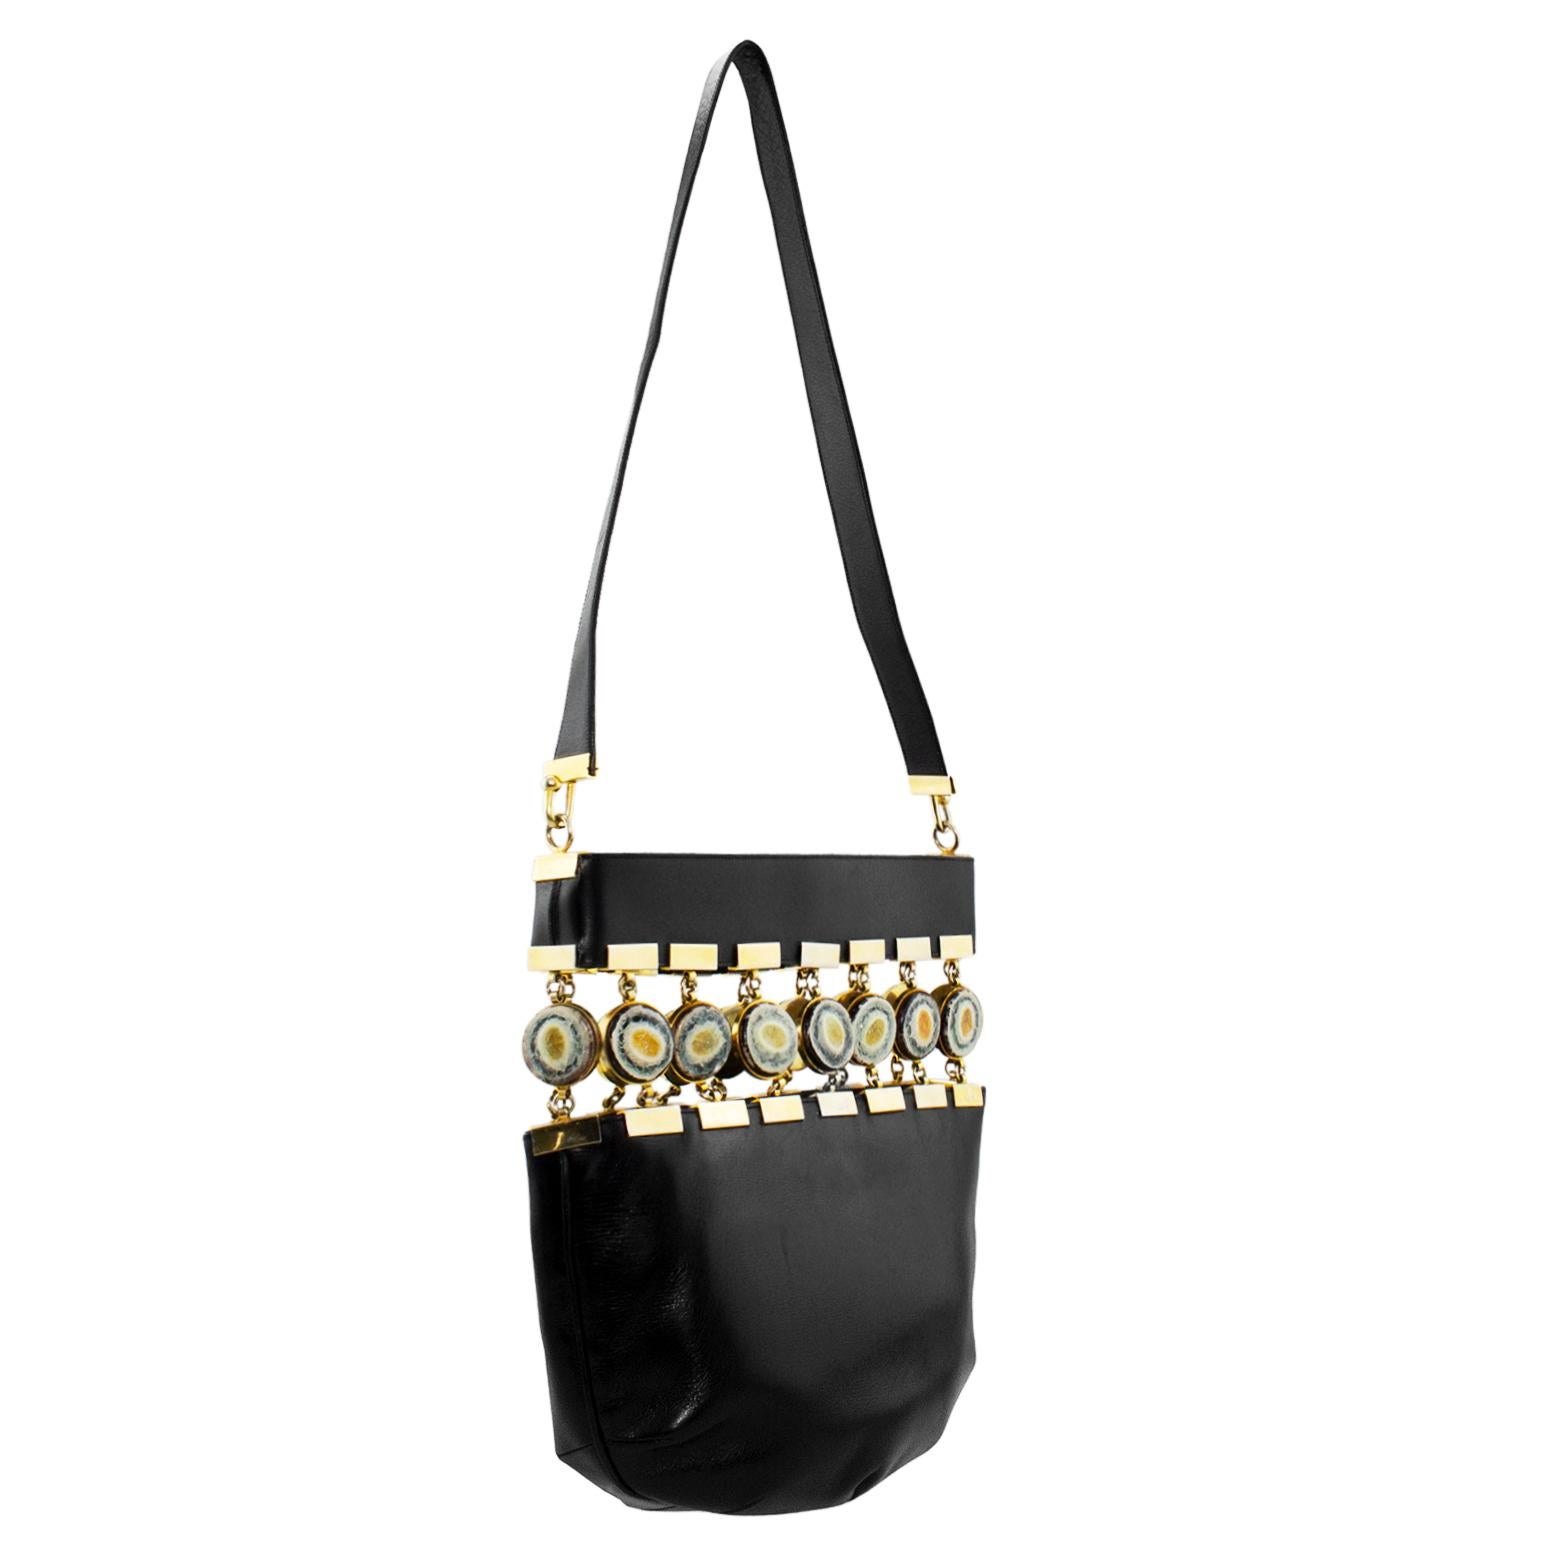 Very cool and unique Ferragamo black leather bucket style bag from the 1970s. The most intriguing  part of this bag is the cut out in the top half with round agate geodes set in gold tone metal and attached with gold tone metal links and